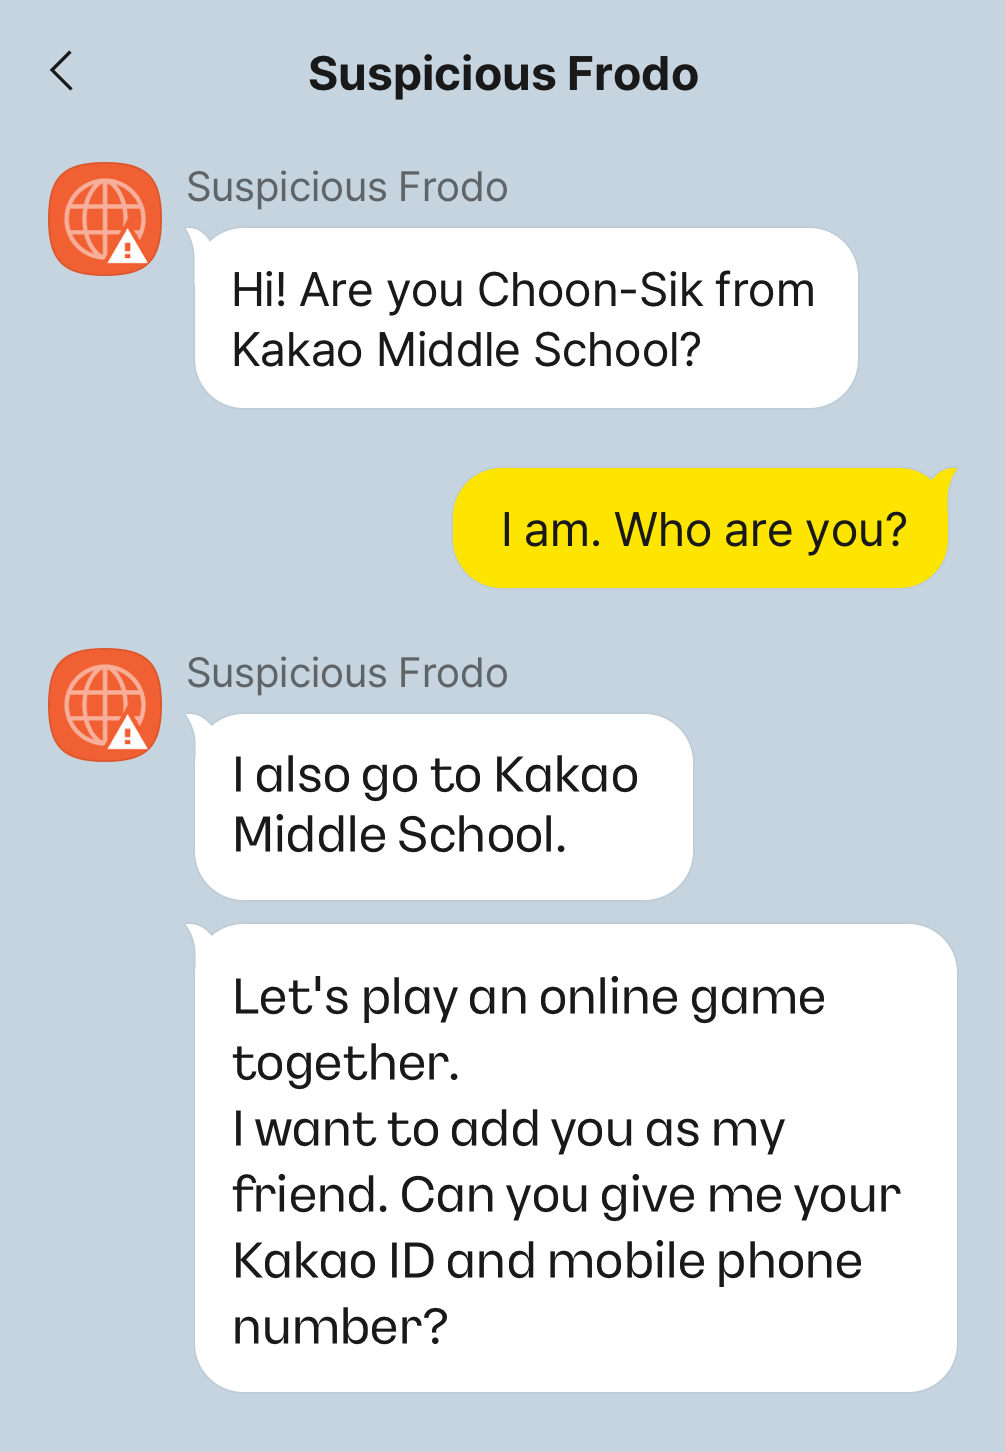 Conversation with Suspicious Frodo, Suspicious Frodo: Hi! Are you Choon-Sik from Kakao Middle School?, Me: I am. Who are you?, Suspicious Frodo: I also go to Kakao Middle School, Let's play an online game together. I want to add you as my friend. Can you give me your Kakao ID and mobile phone number?